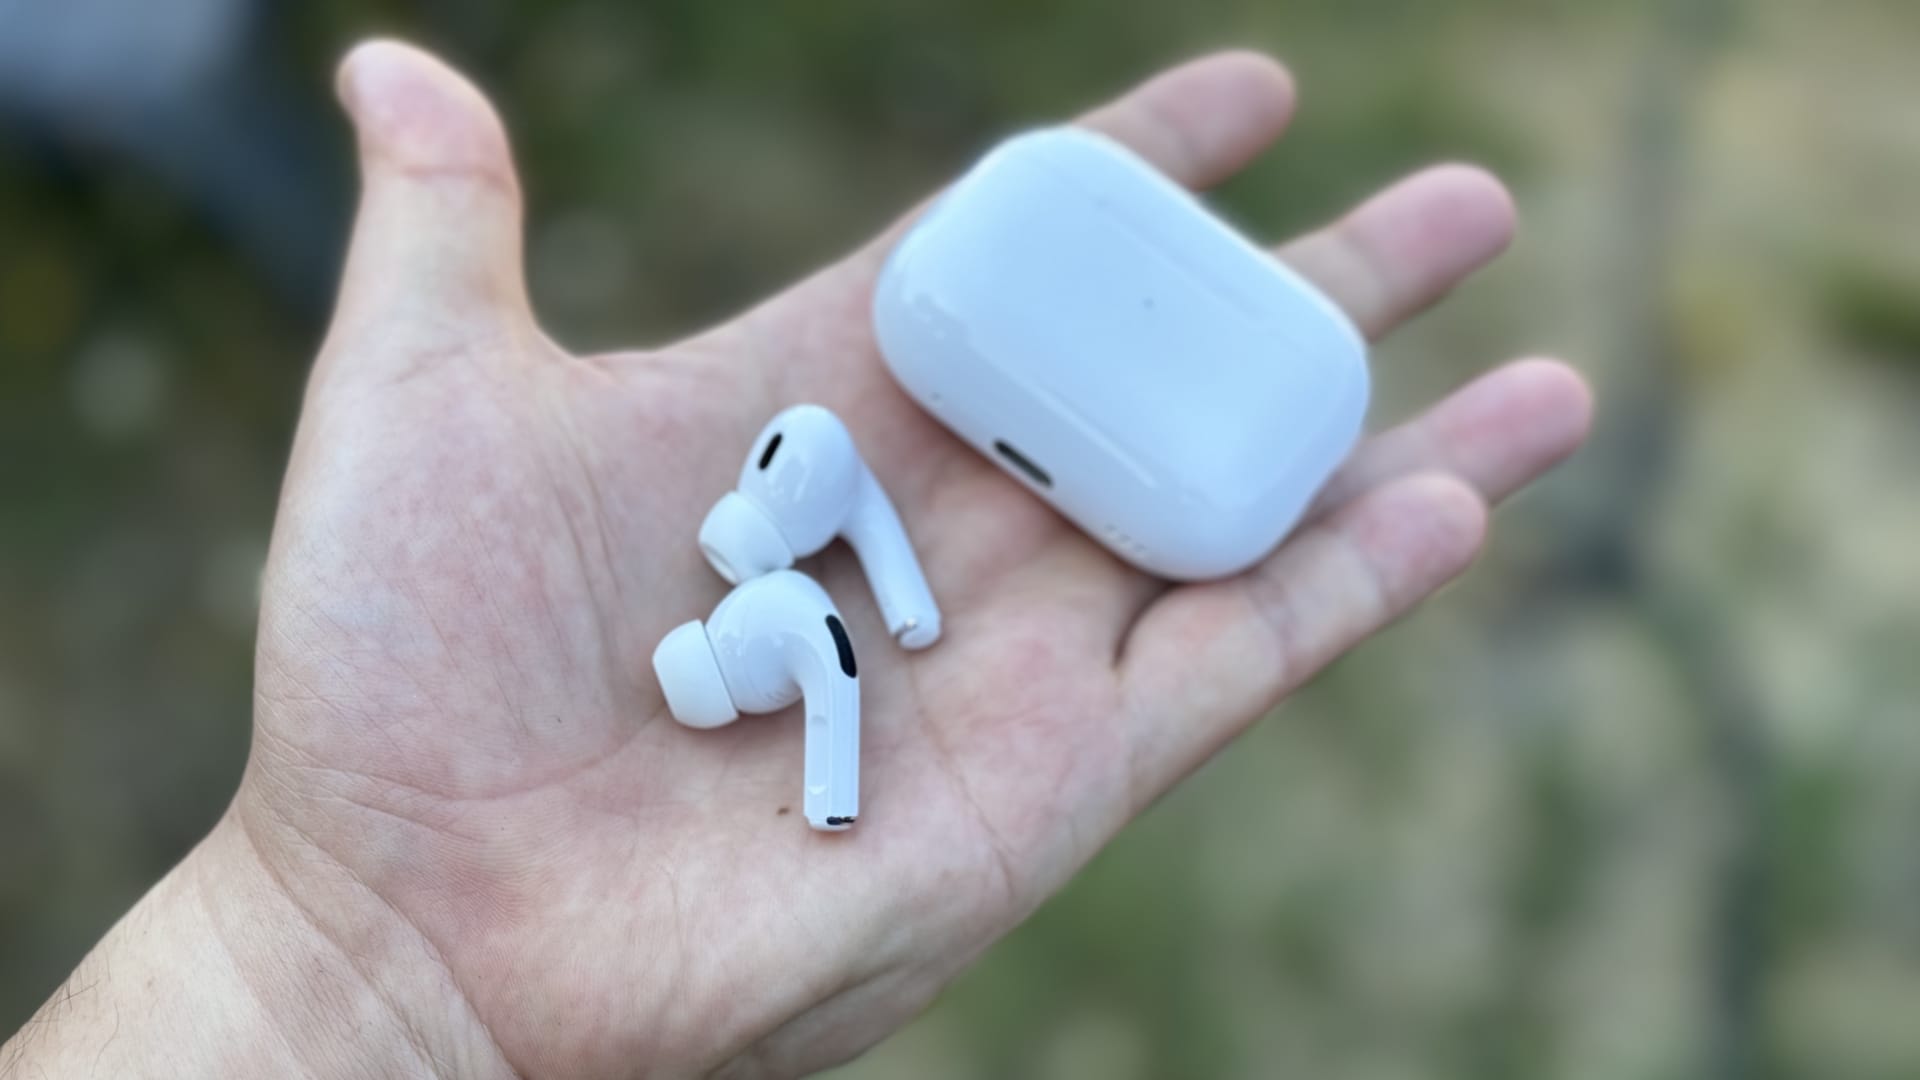 Apple’s new AirPods won’t have to be taken out of your ears as usually, thanks to sophisticated AI